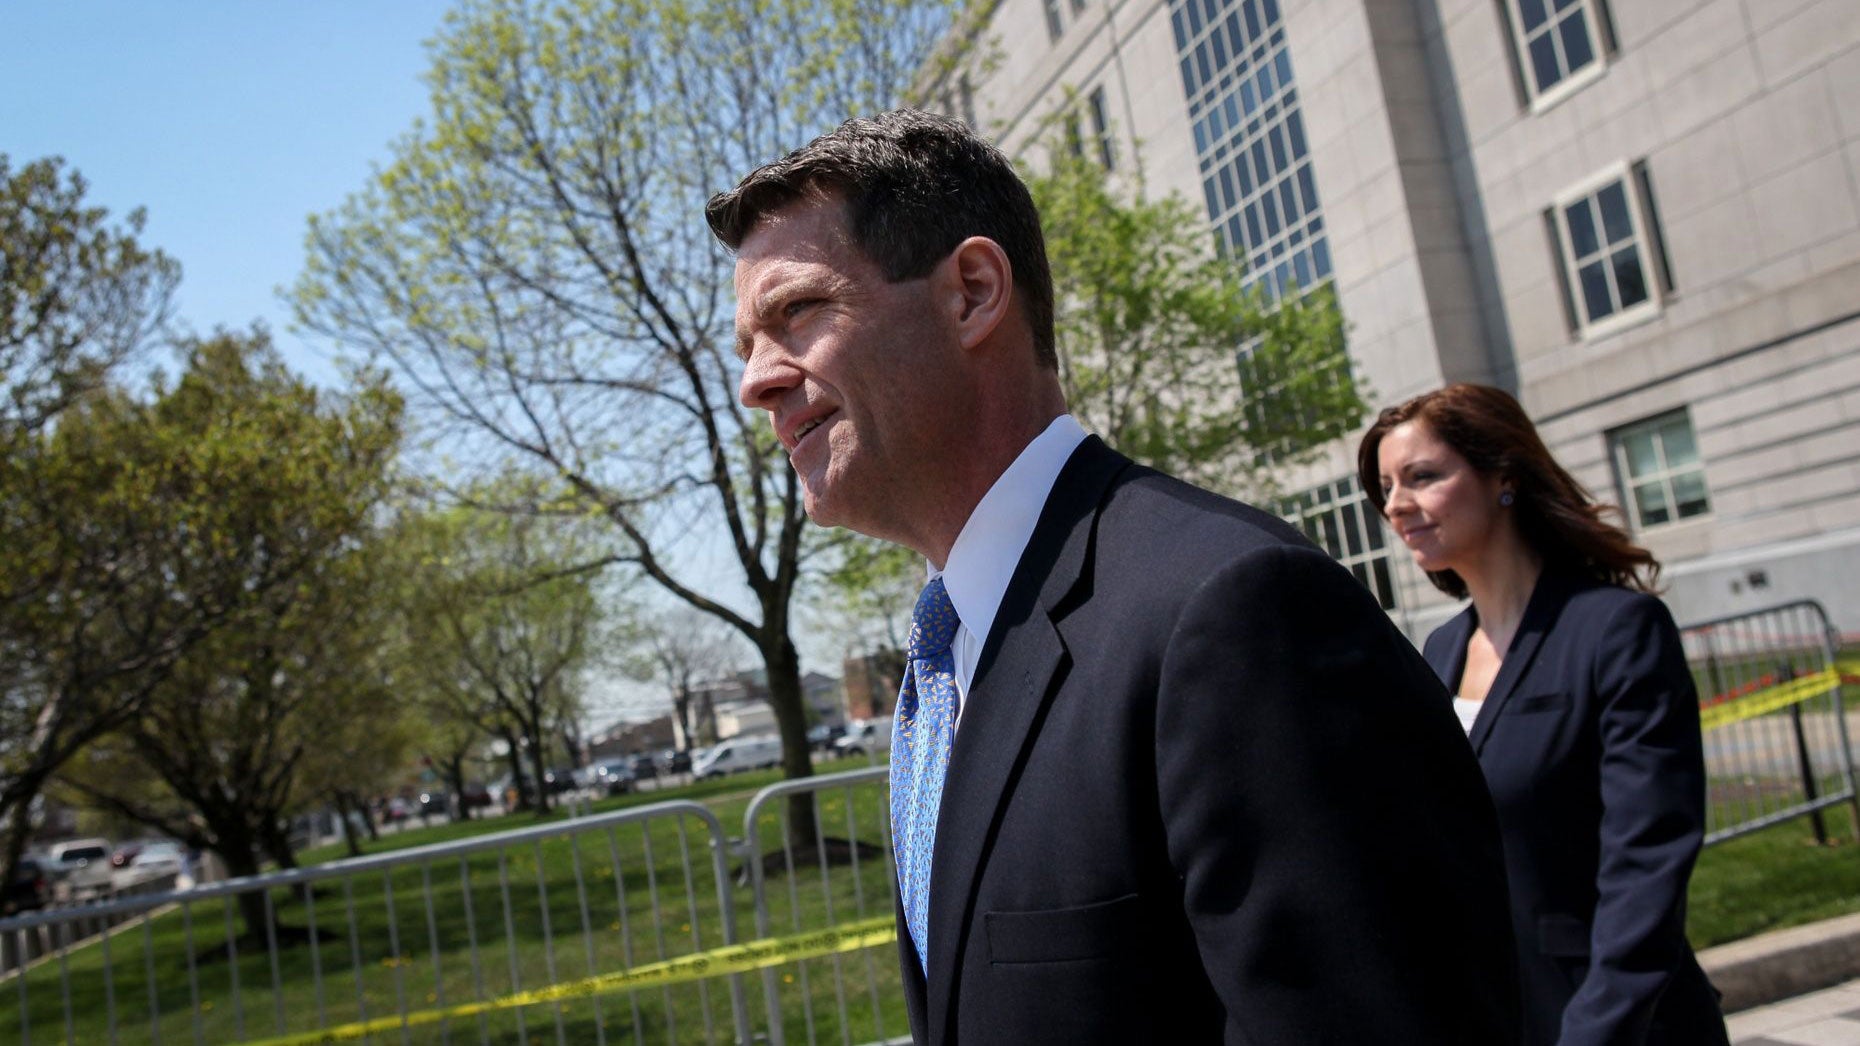 Former Deputy Executive Director at the Port Authority of New York and New Jersey Bill Baroni outside Newark Federal Court following his arraignment. (Stephen Nessen/WNYC)